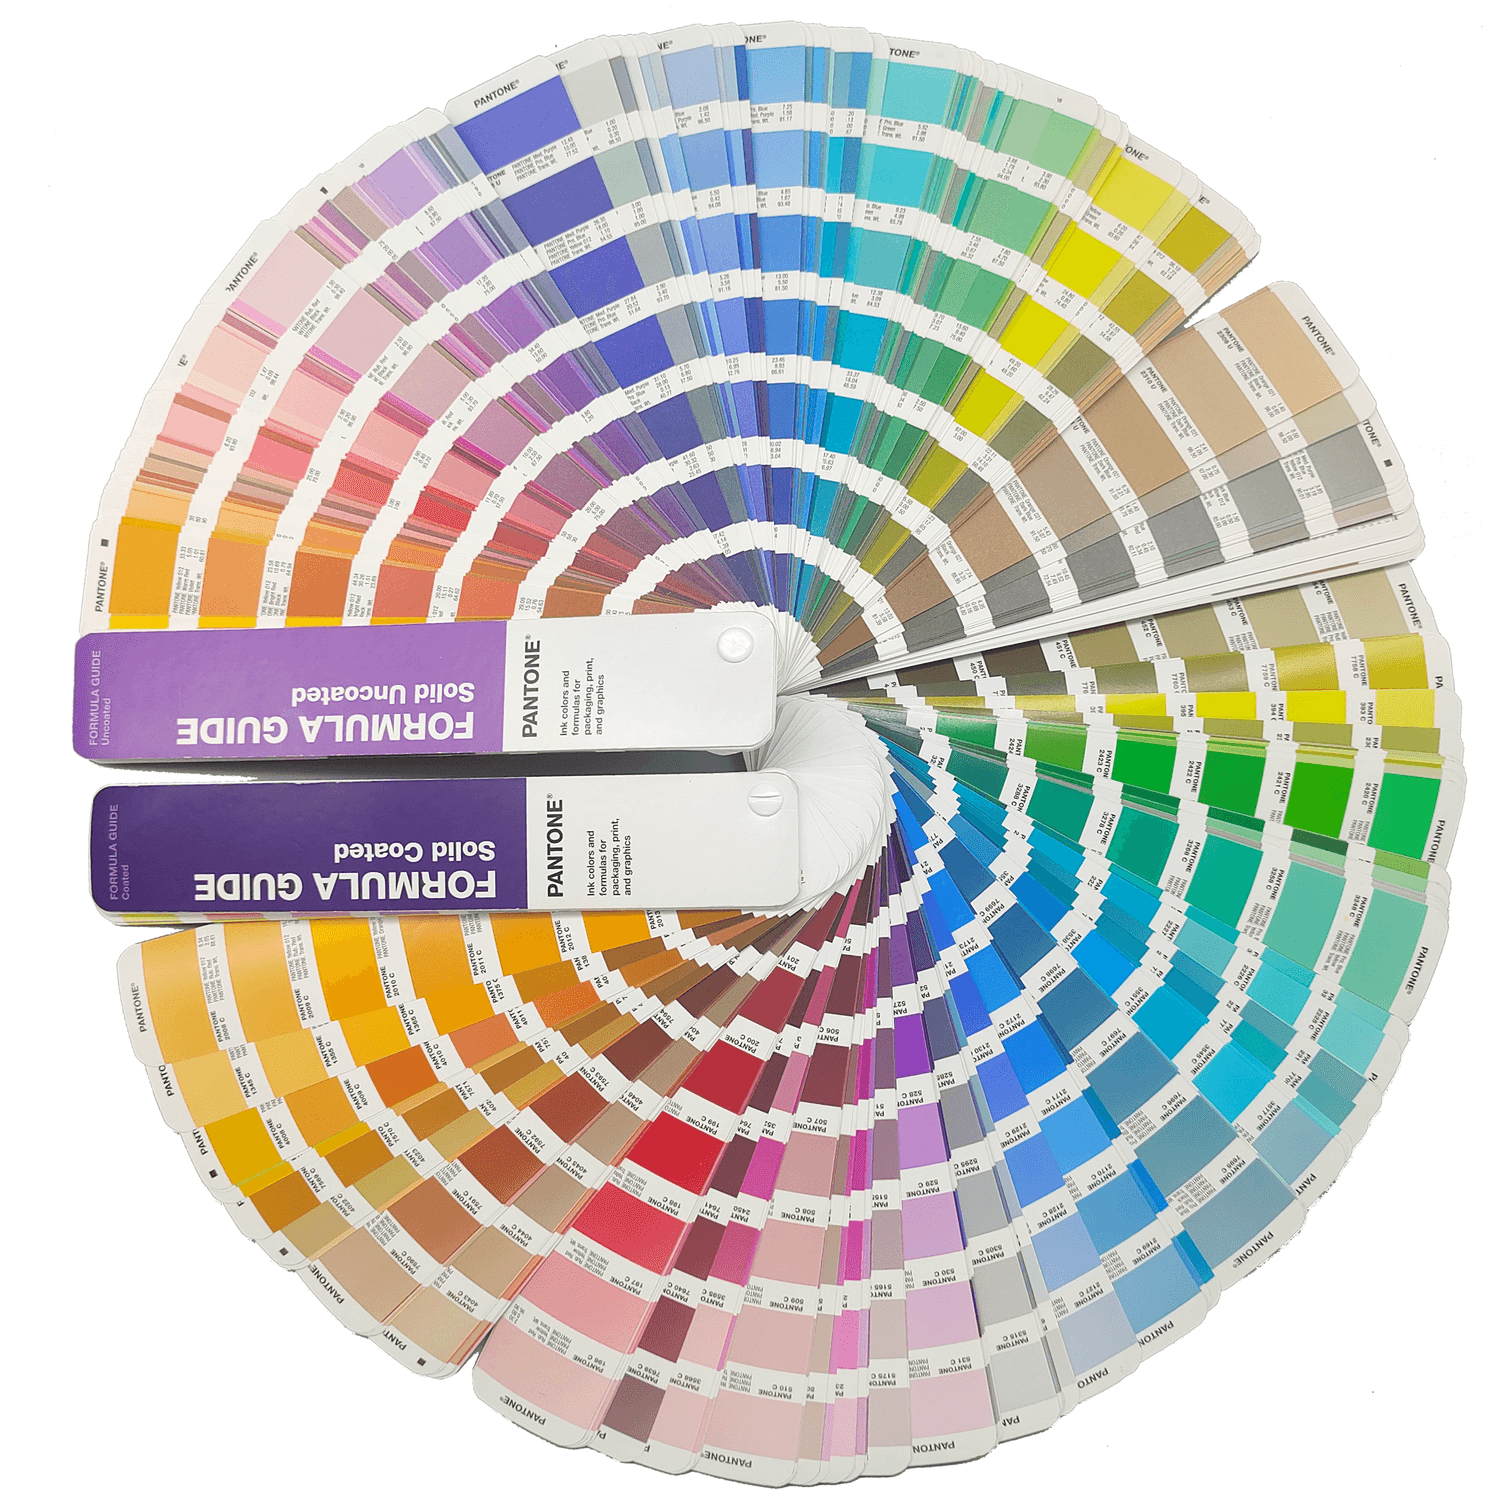 pantone color map for color selection of napkin tissue dyeing